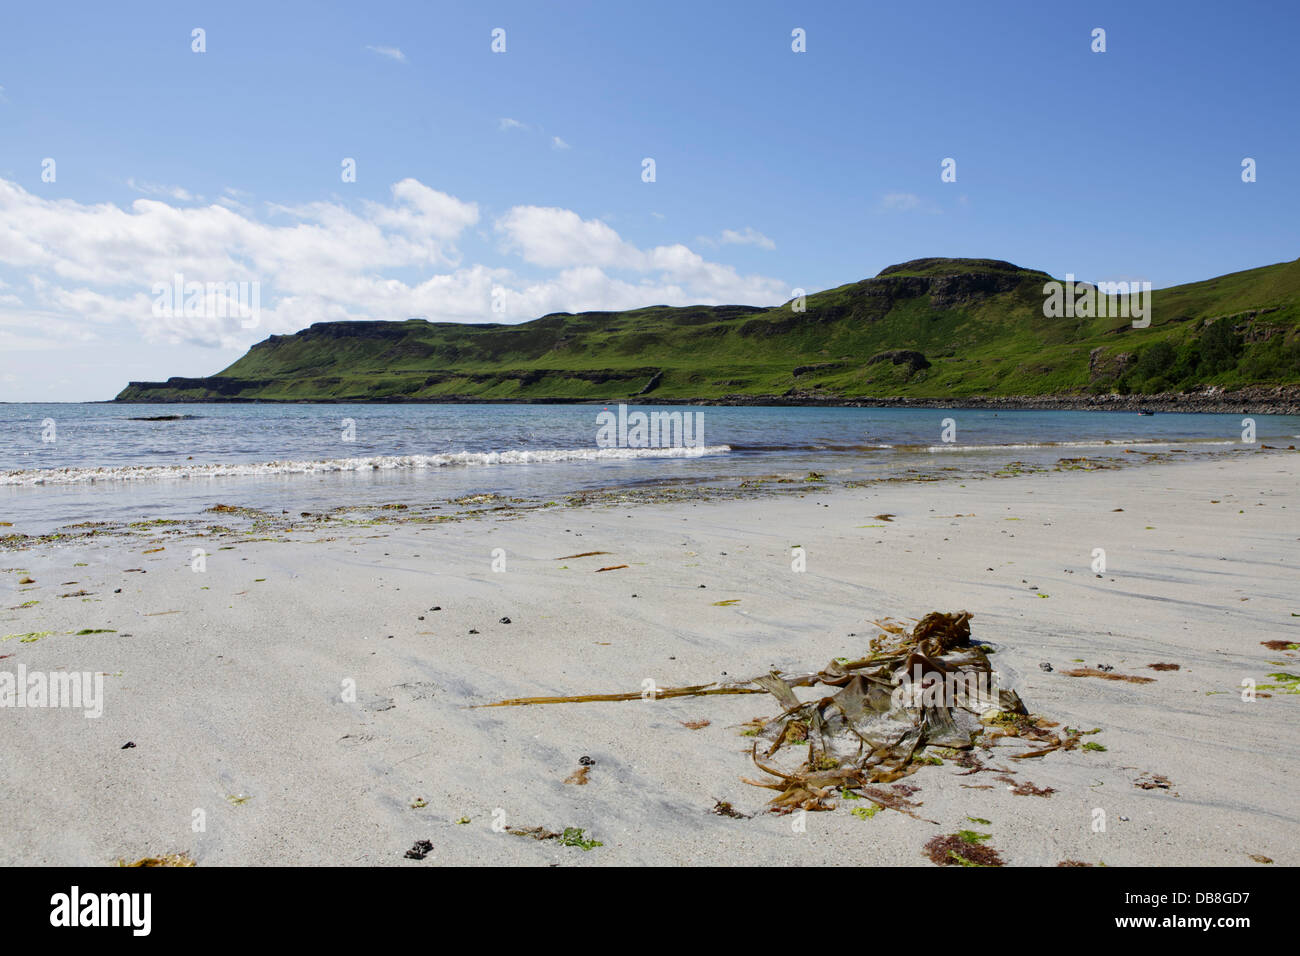 Calgary bay on the isle of Mull with the tide coming in up the sandy beach Stock Photo